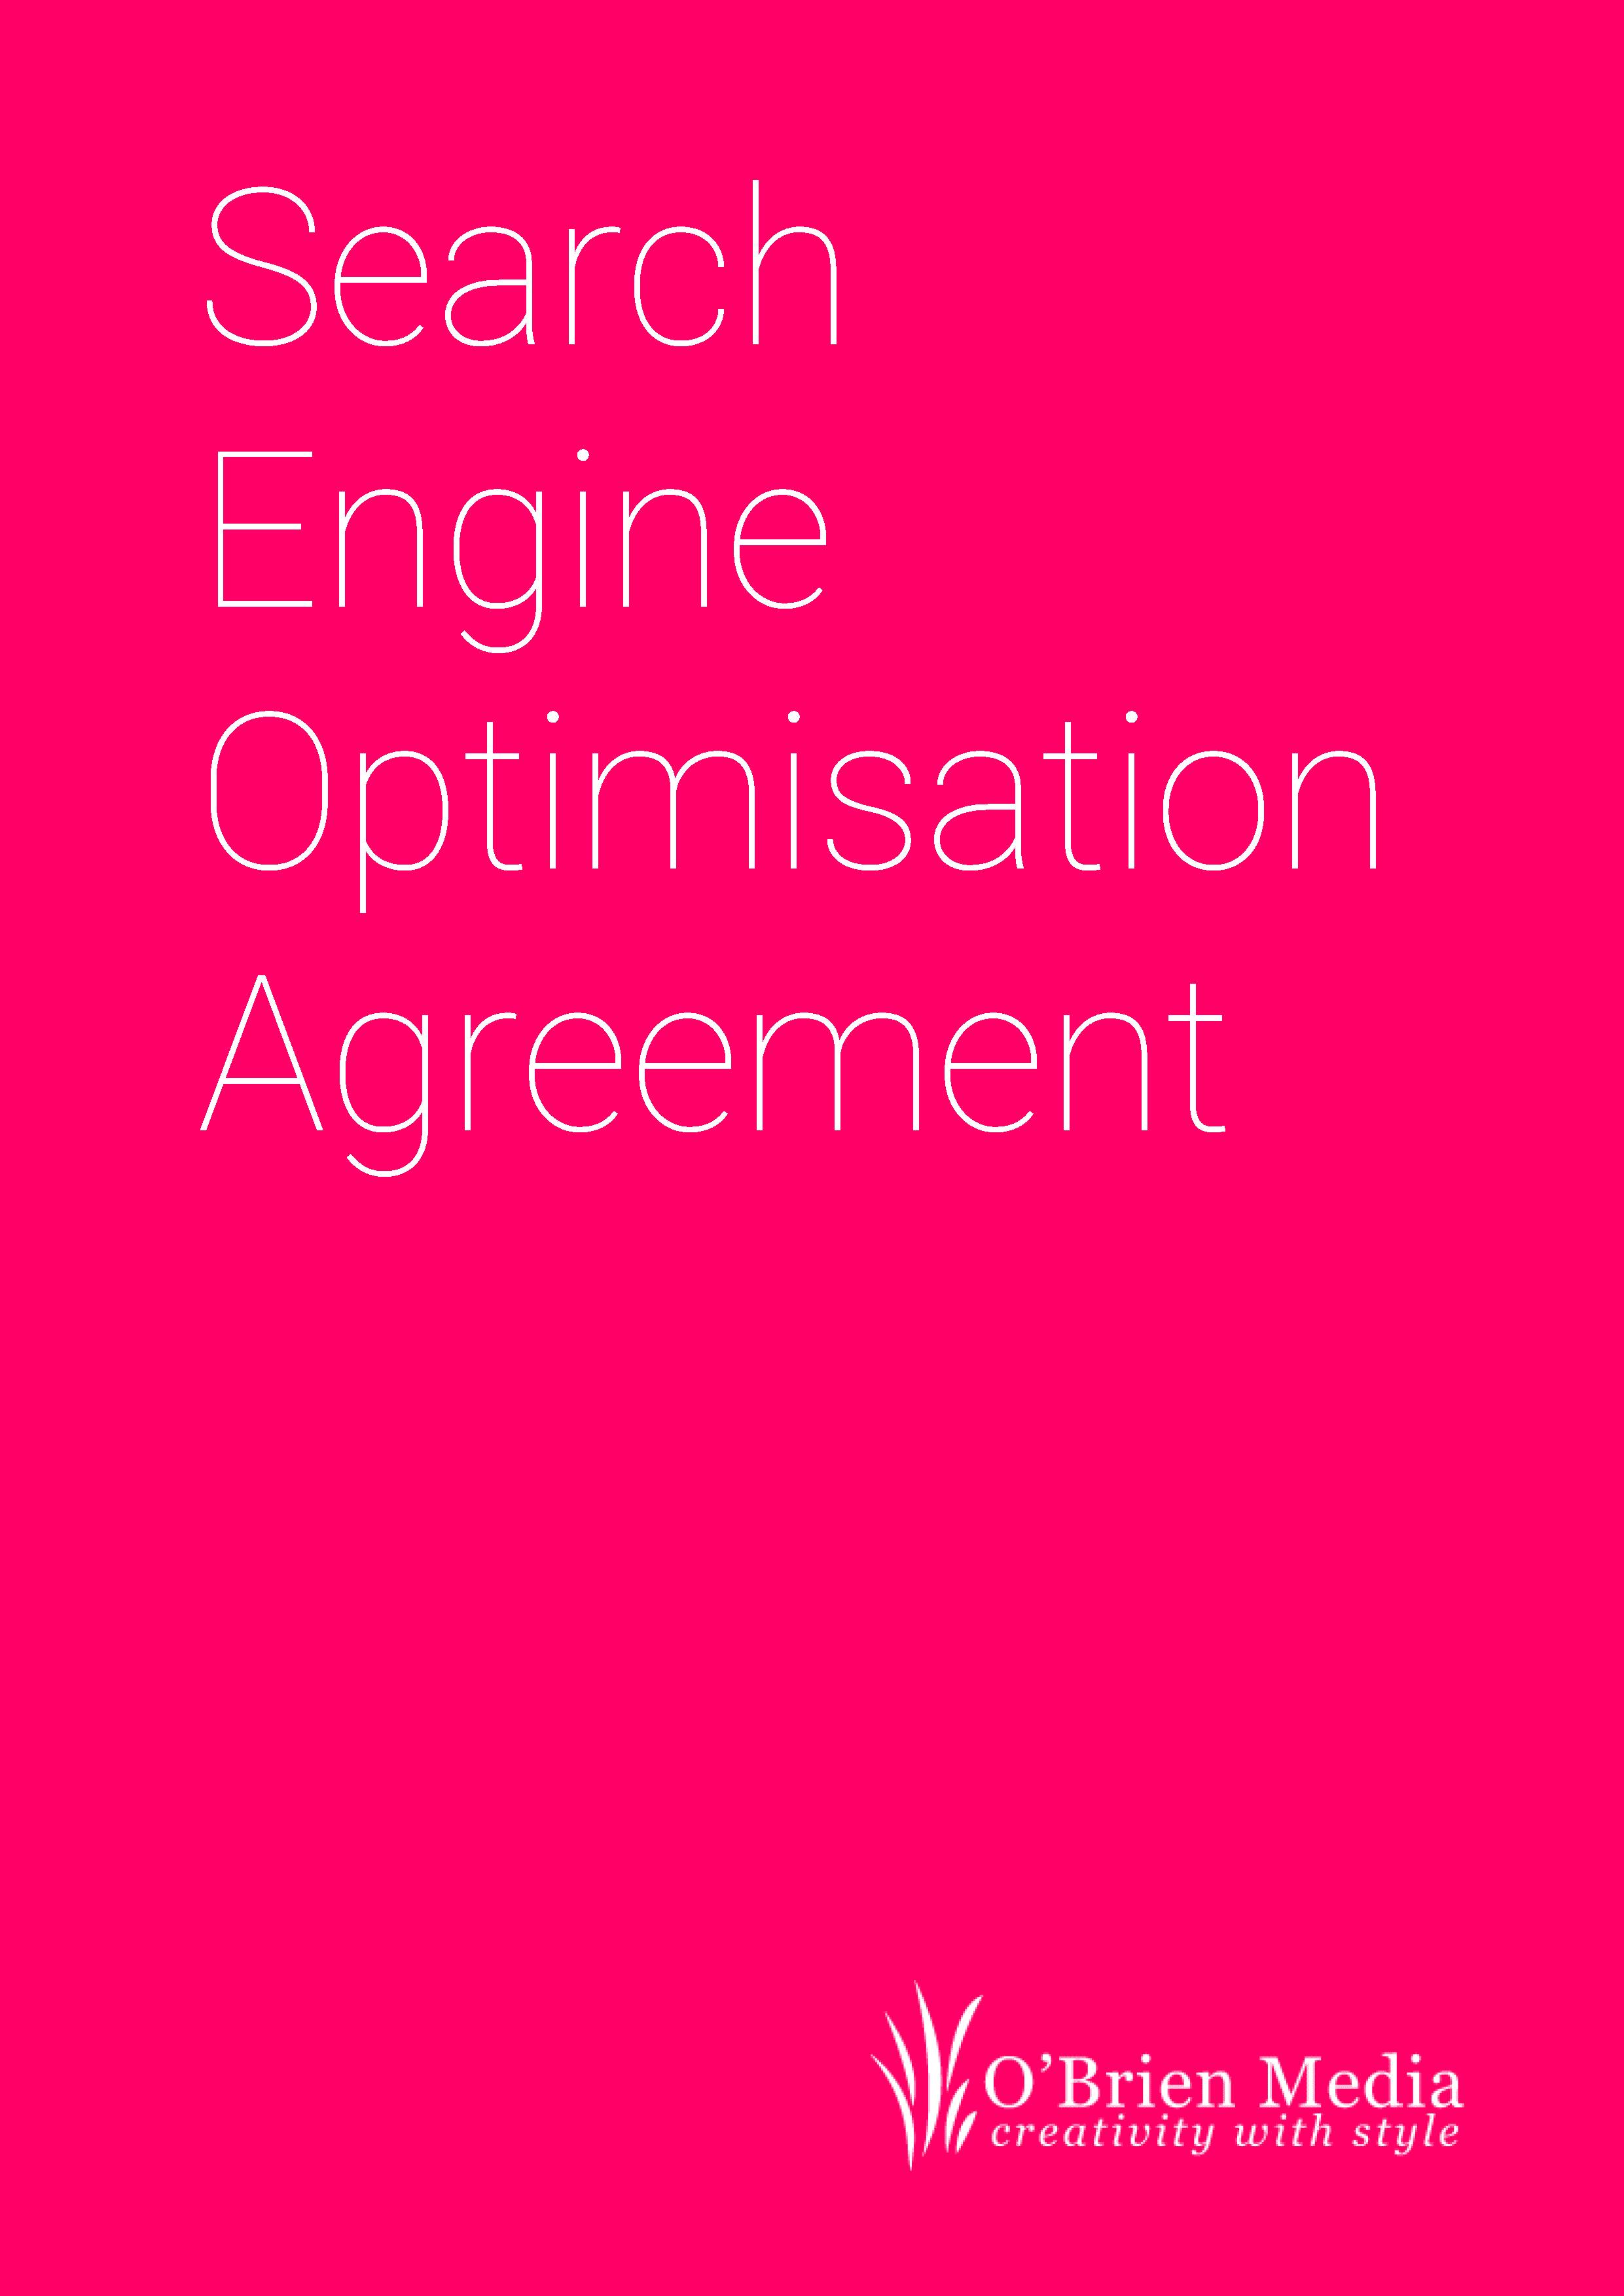 Search Engine Optimisation Agreement front page